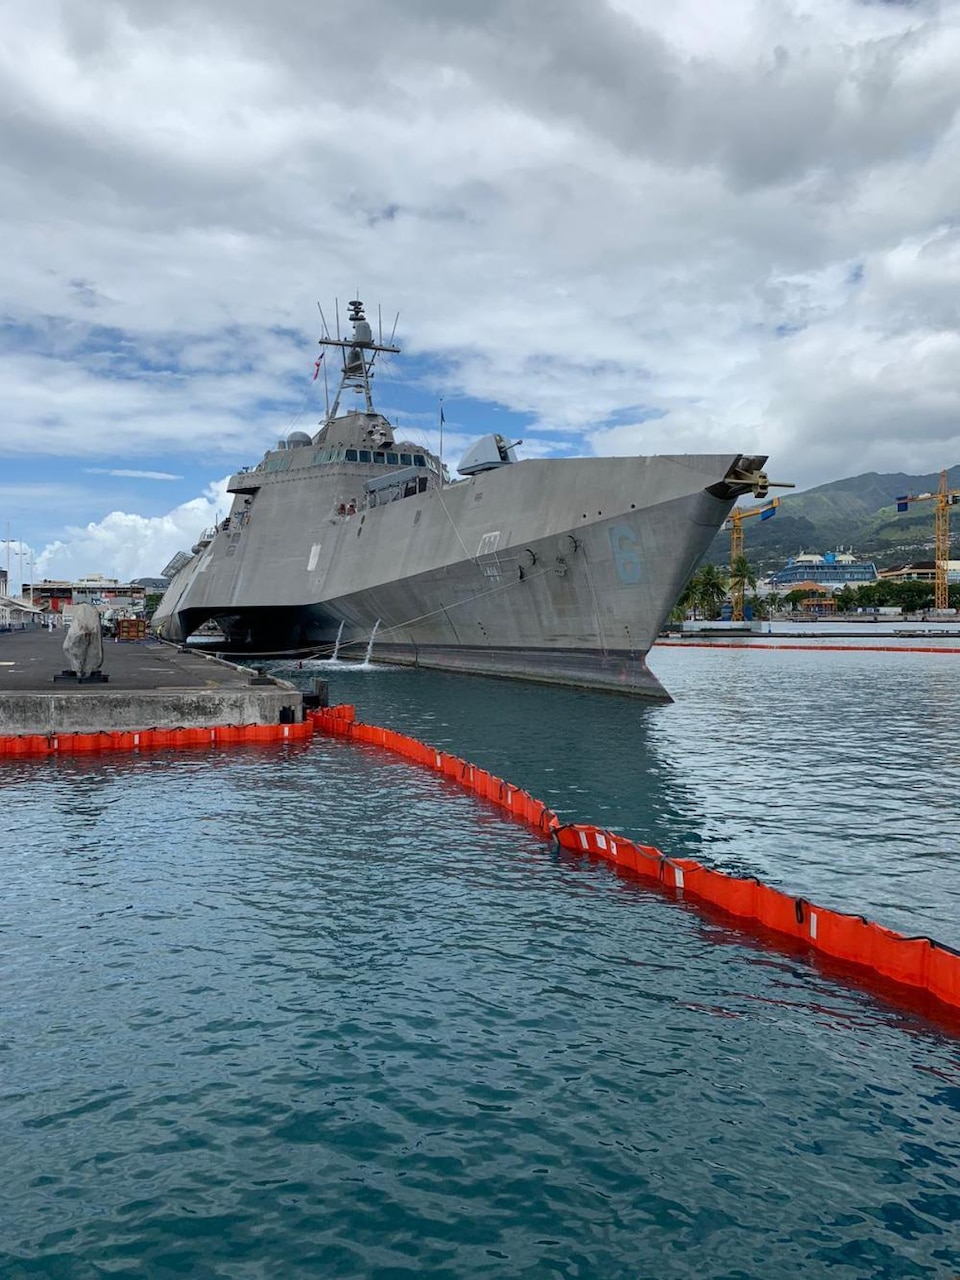 Independence-variant littoral combat ship USS Jackson (LCS 6) sits pierside in Papeete, Tahiti, Sept. 20.